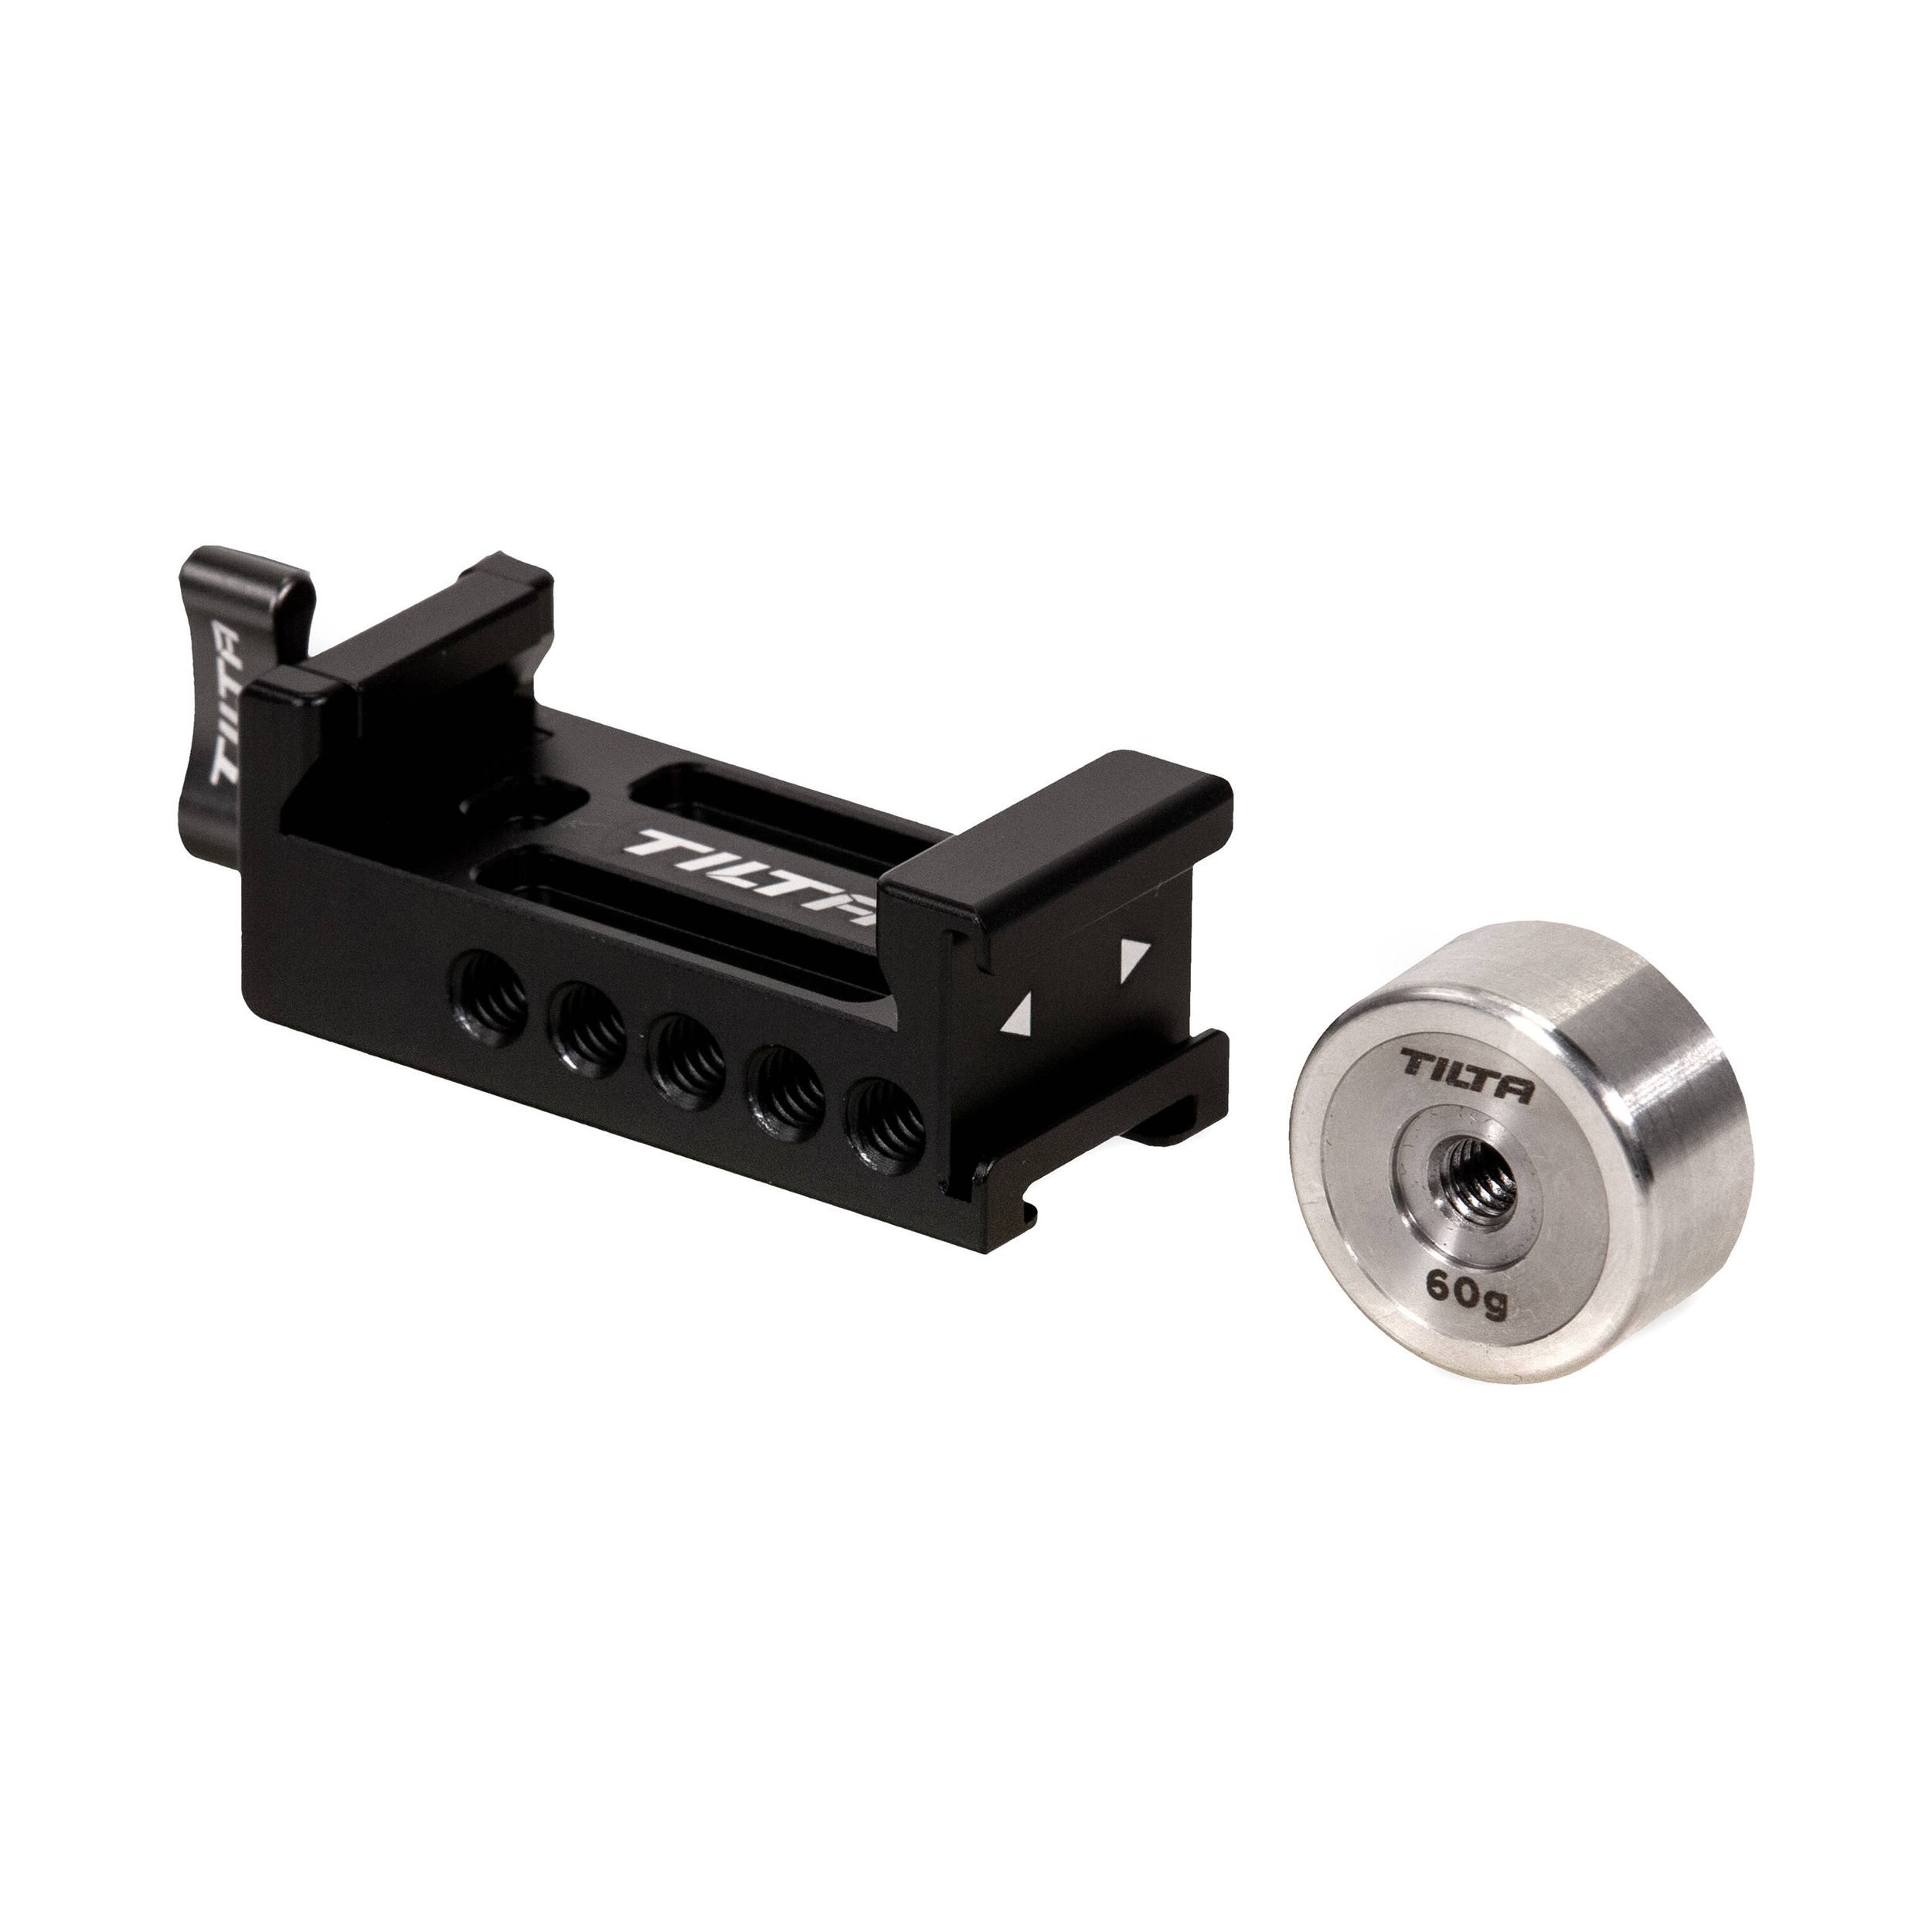 Tilta Quick Release Baseplate Counterweight Adapter with 2.1 oz Weight